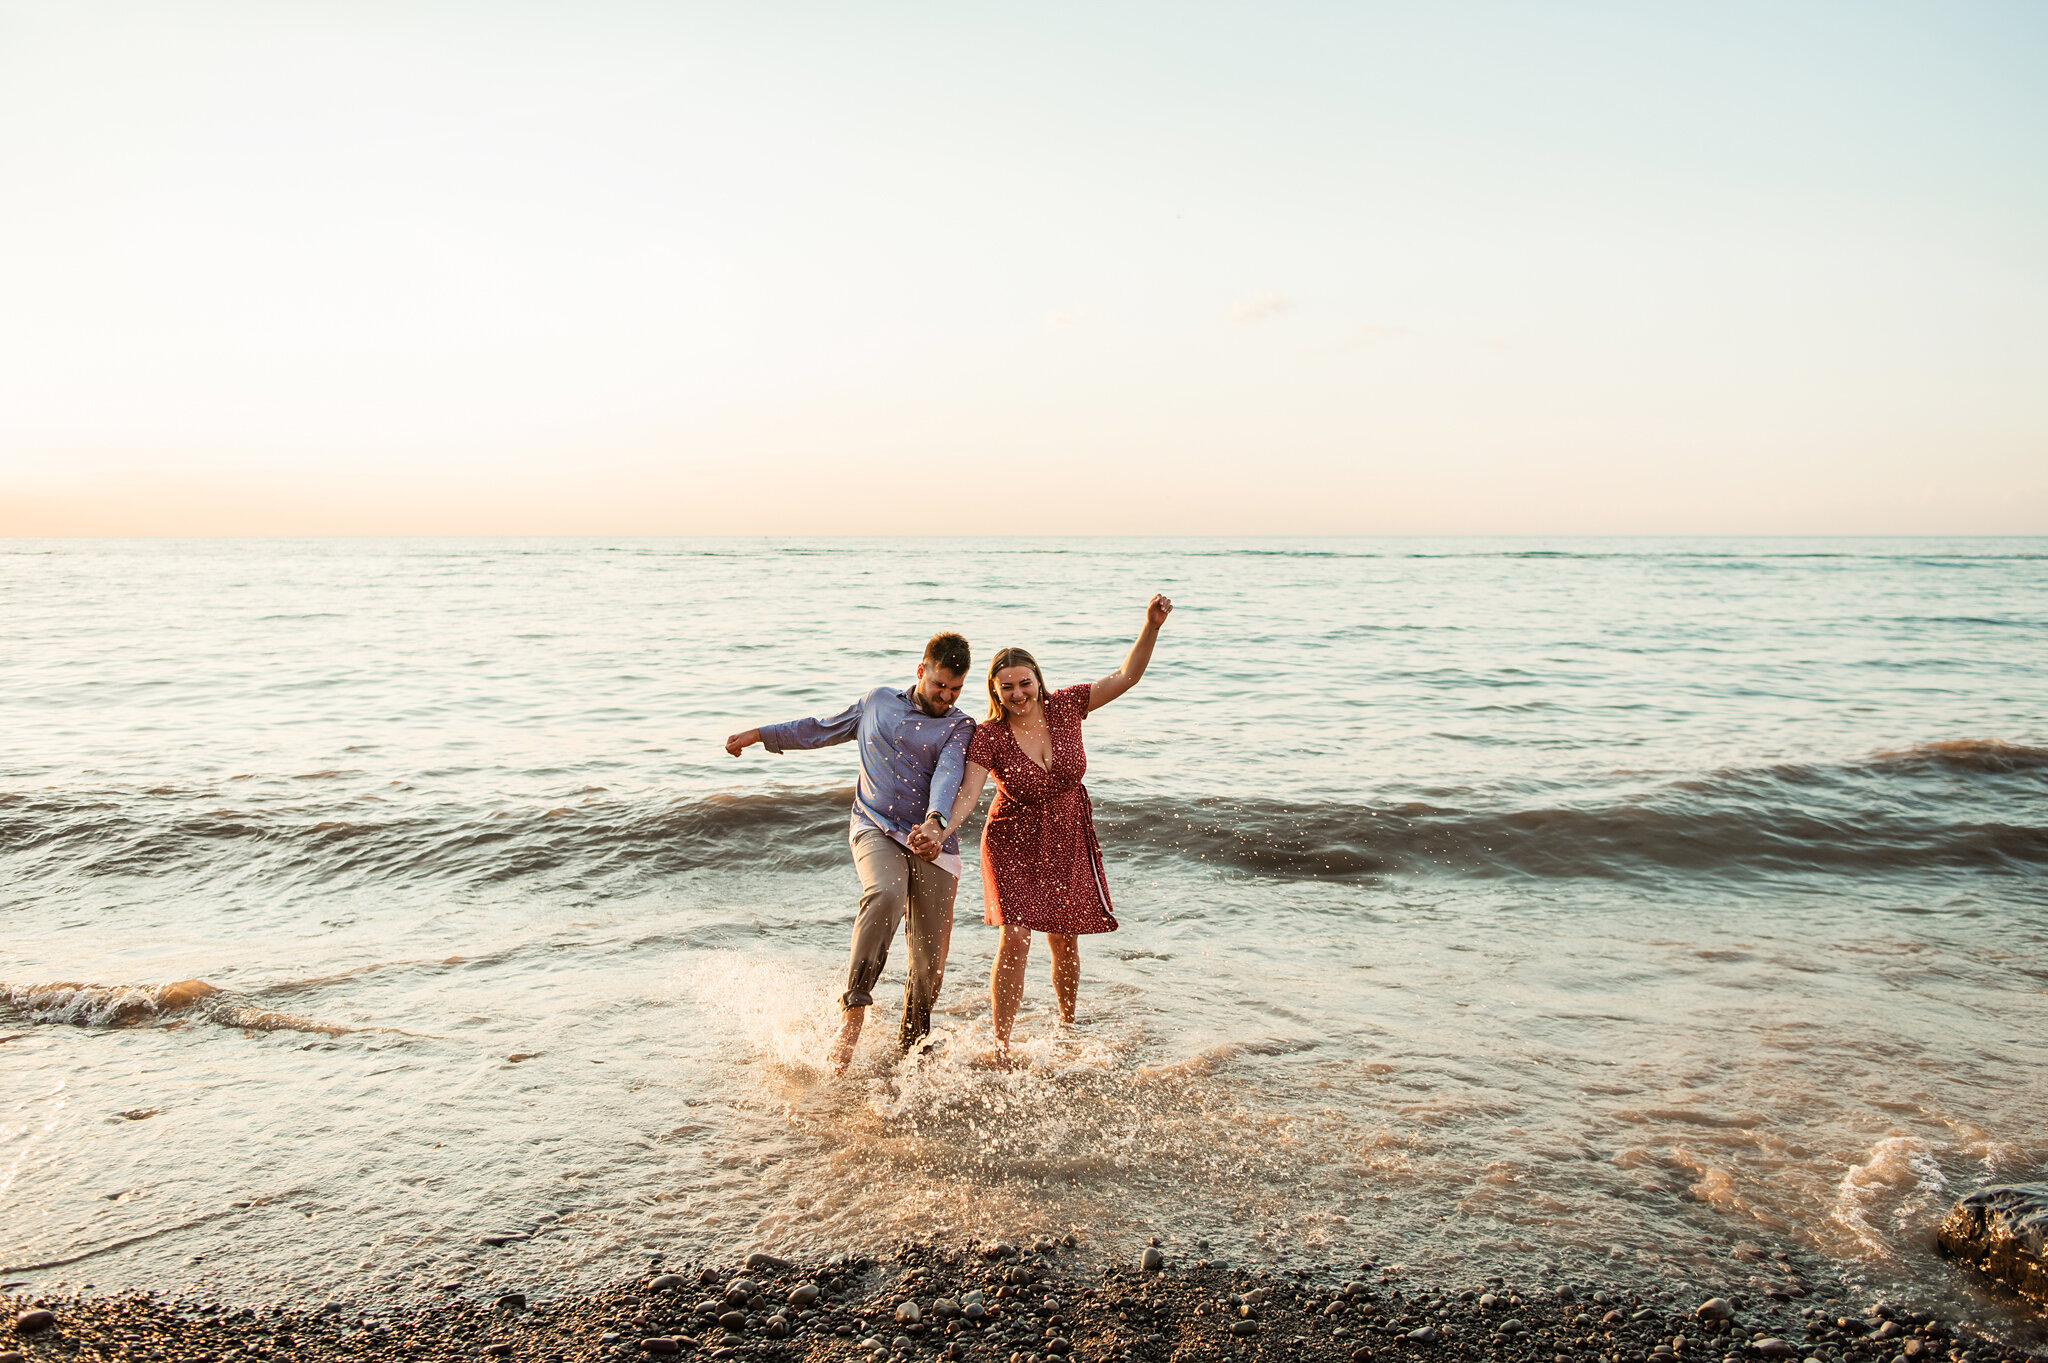 Chimney_Bluffs_State_Park_Rochester_Engagement_Session_JILL_STUDIO_Rochester_NY_Photographer_7087.jpg